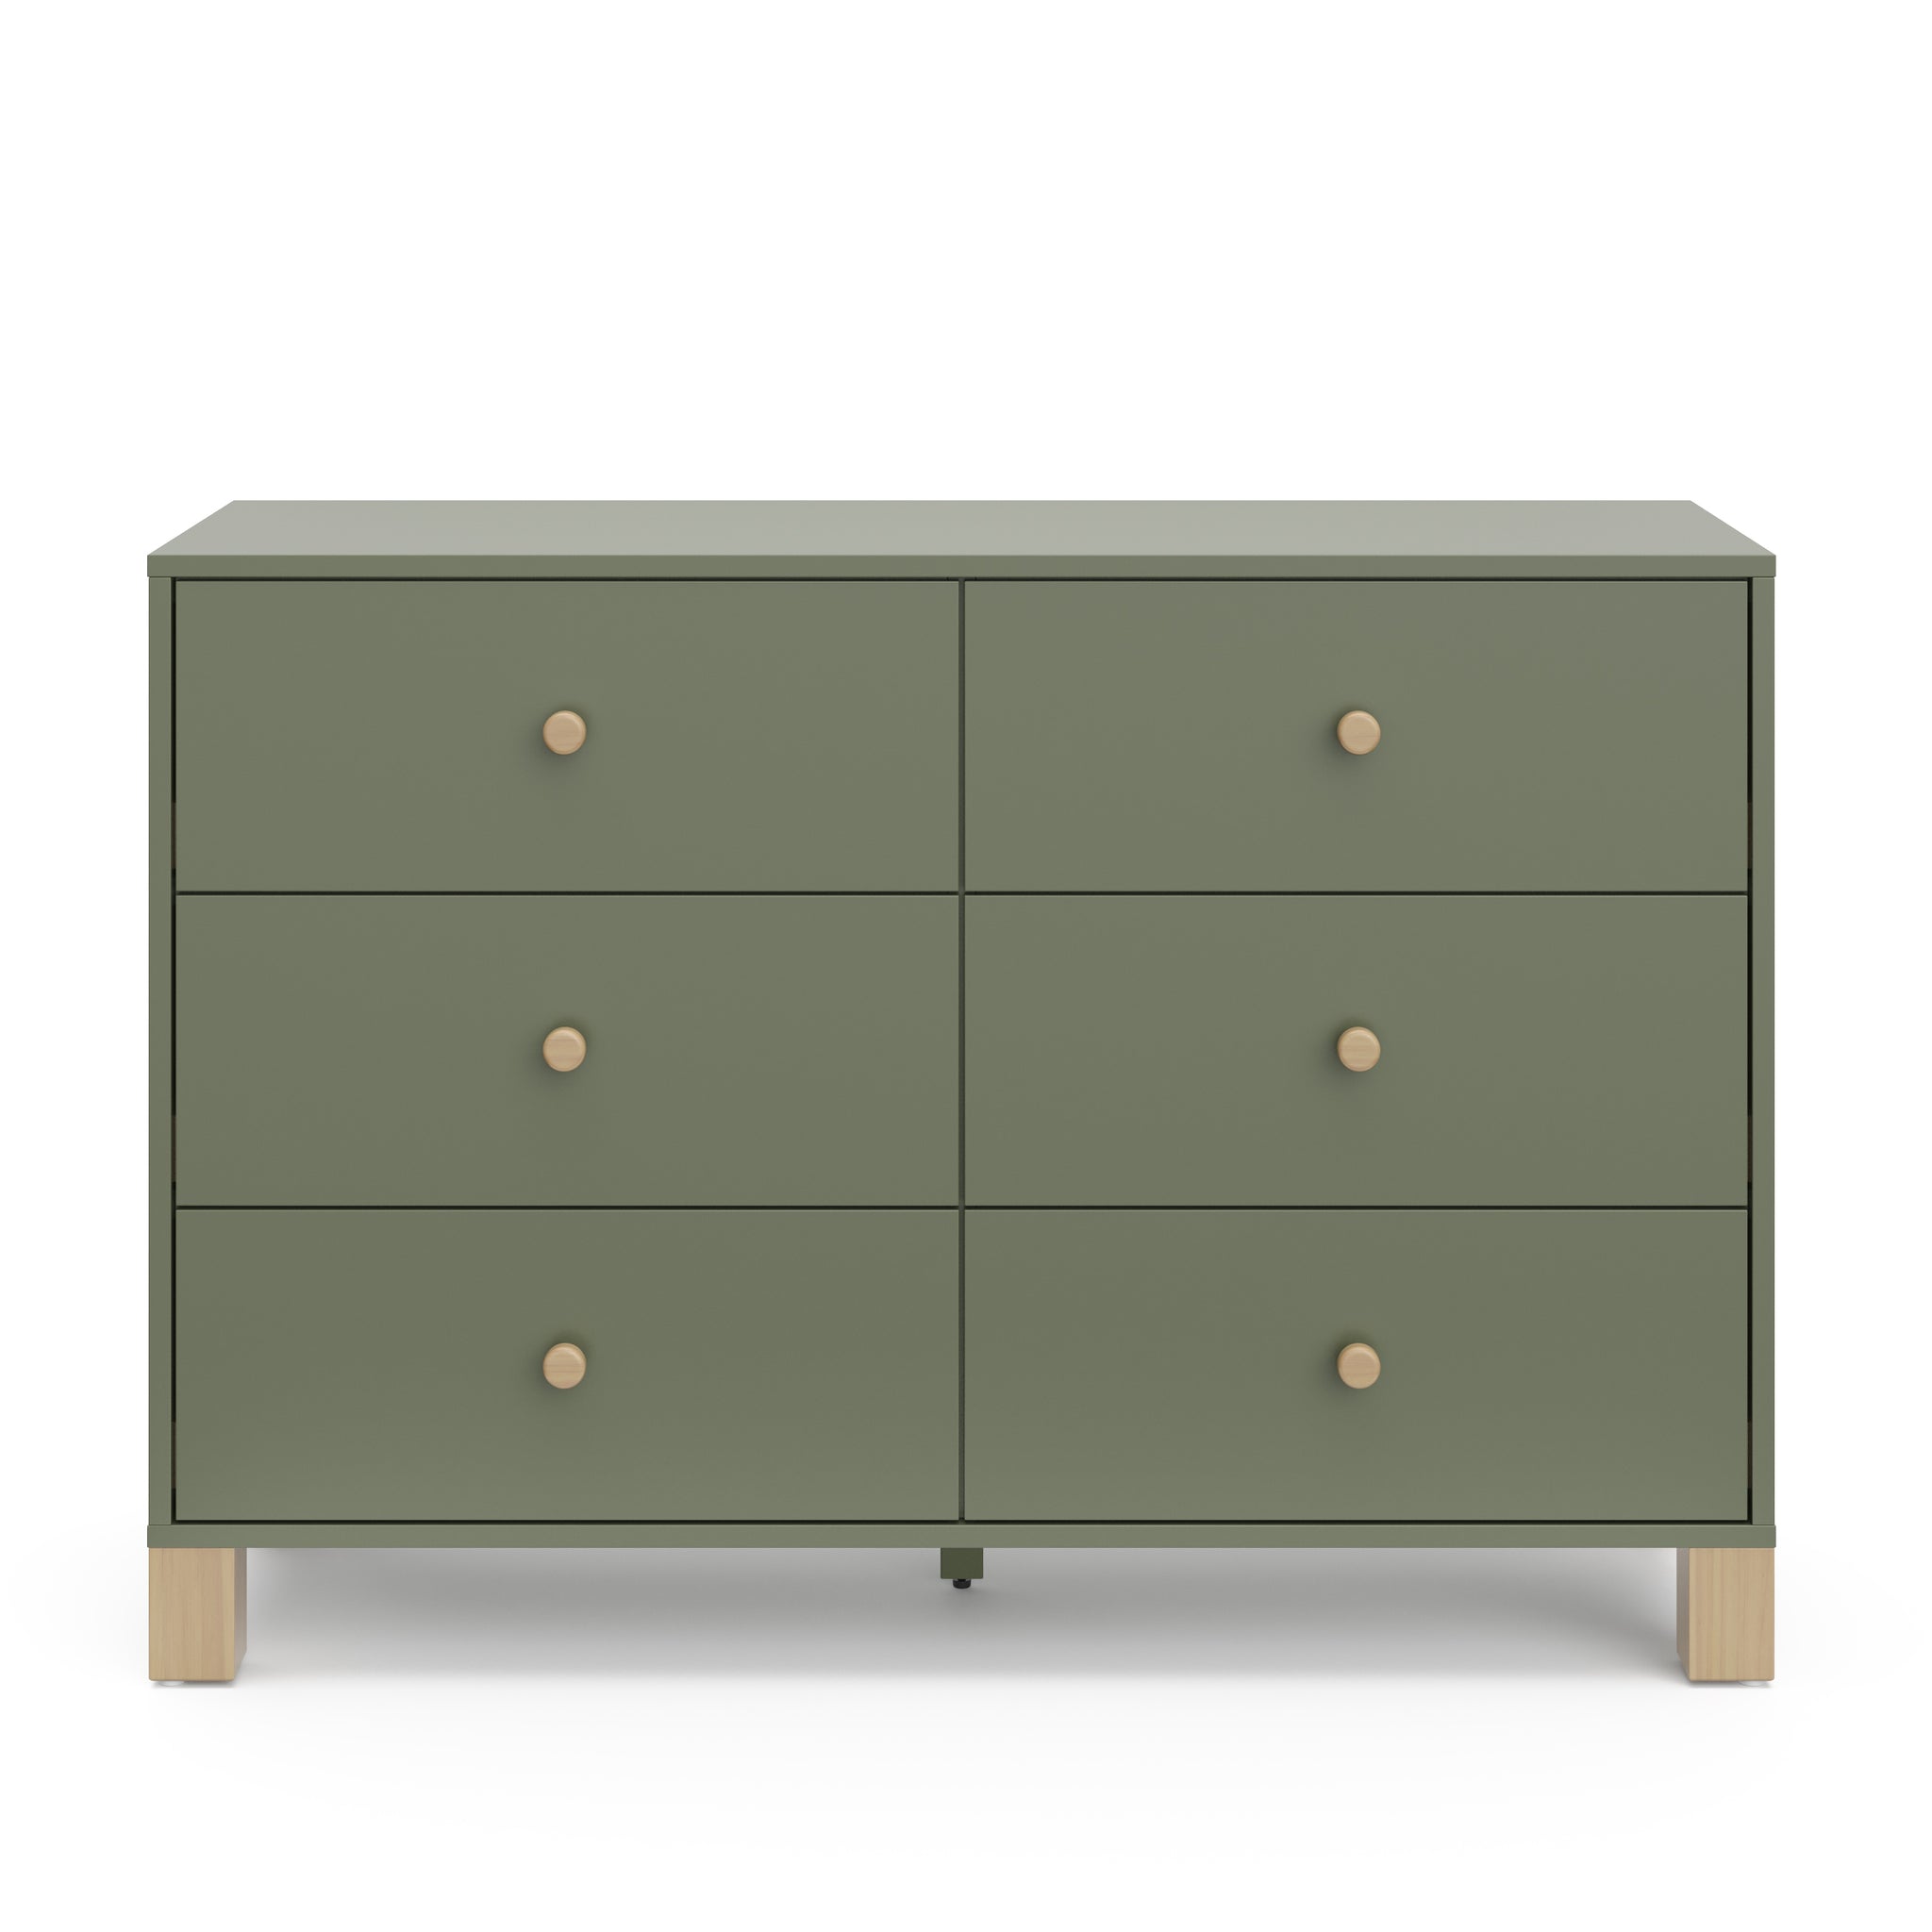 Front view of olive dresser with driftwood knobs and base